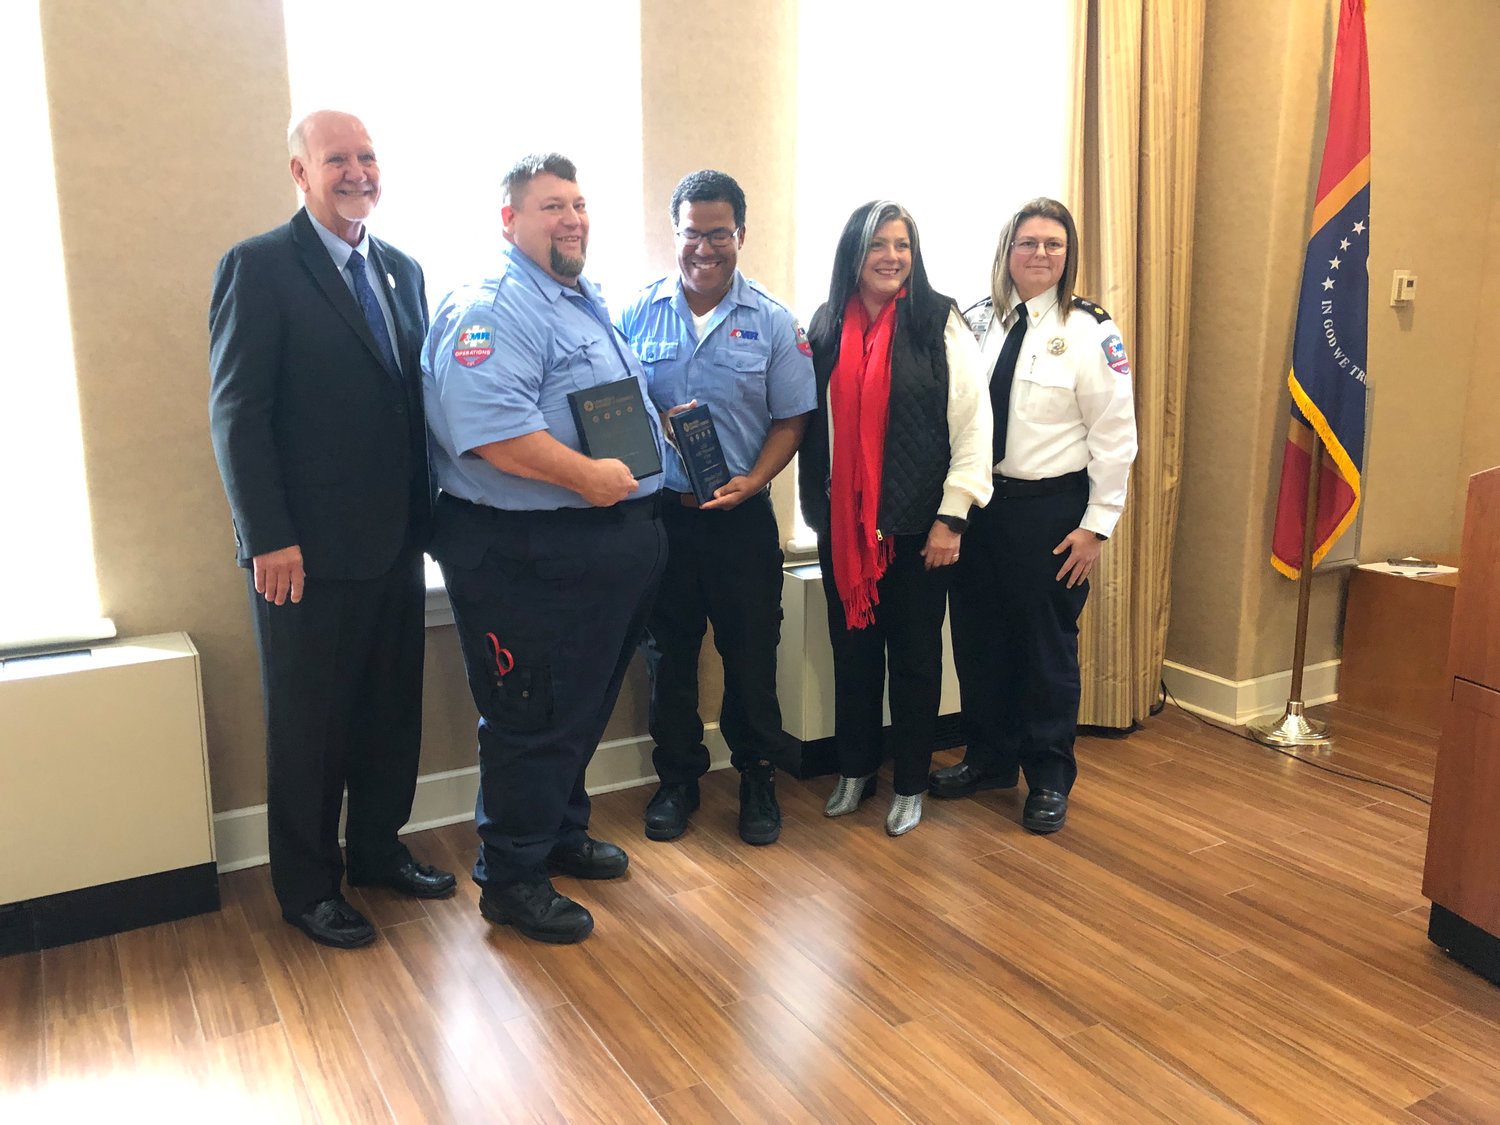 Pictured (l to r) are Mayor George Bass, 2022 AMR First Responder of the Year recipients Roy Williams and Brayden Lynch, Long Beach Chamber of Commerce Chair Melissa Rae Seymour, and AMR Chief Dana Thrower.